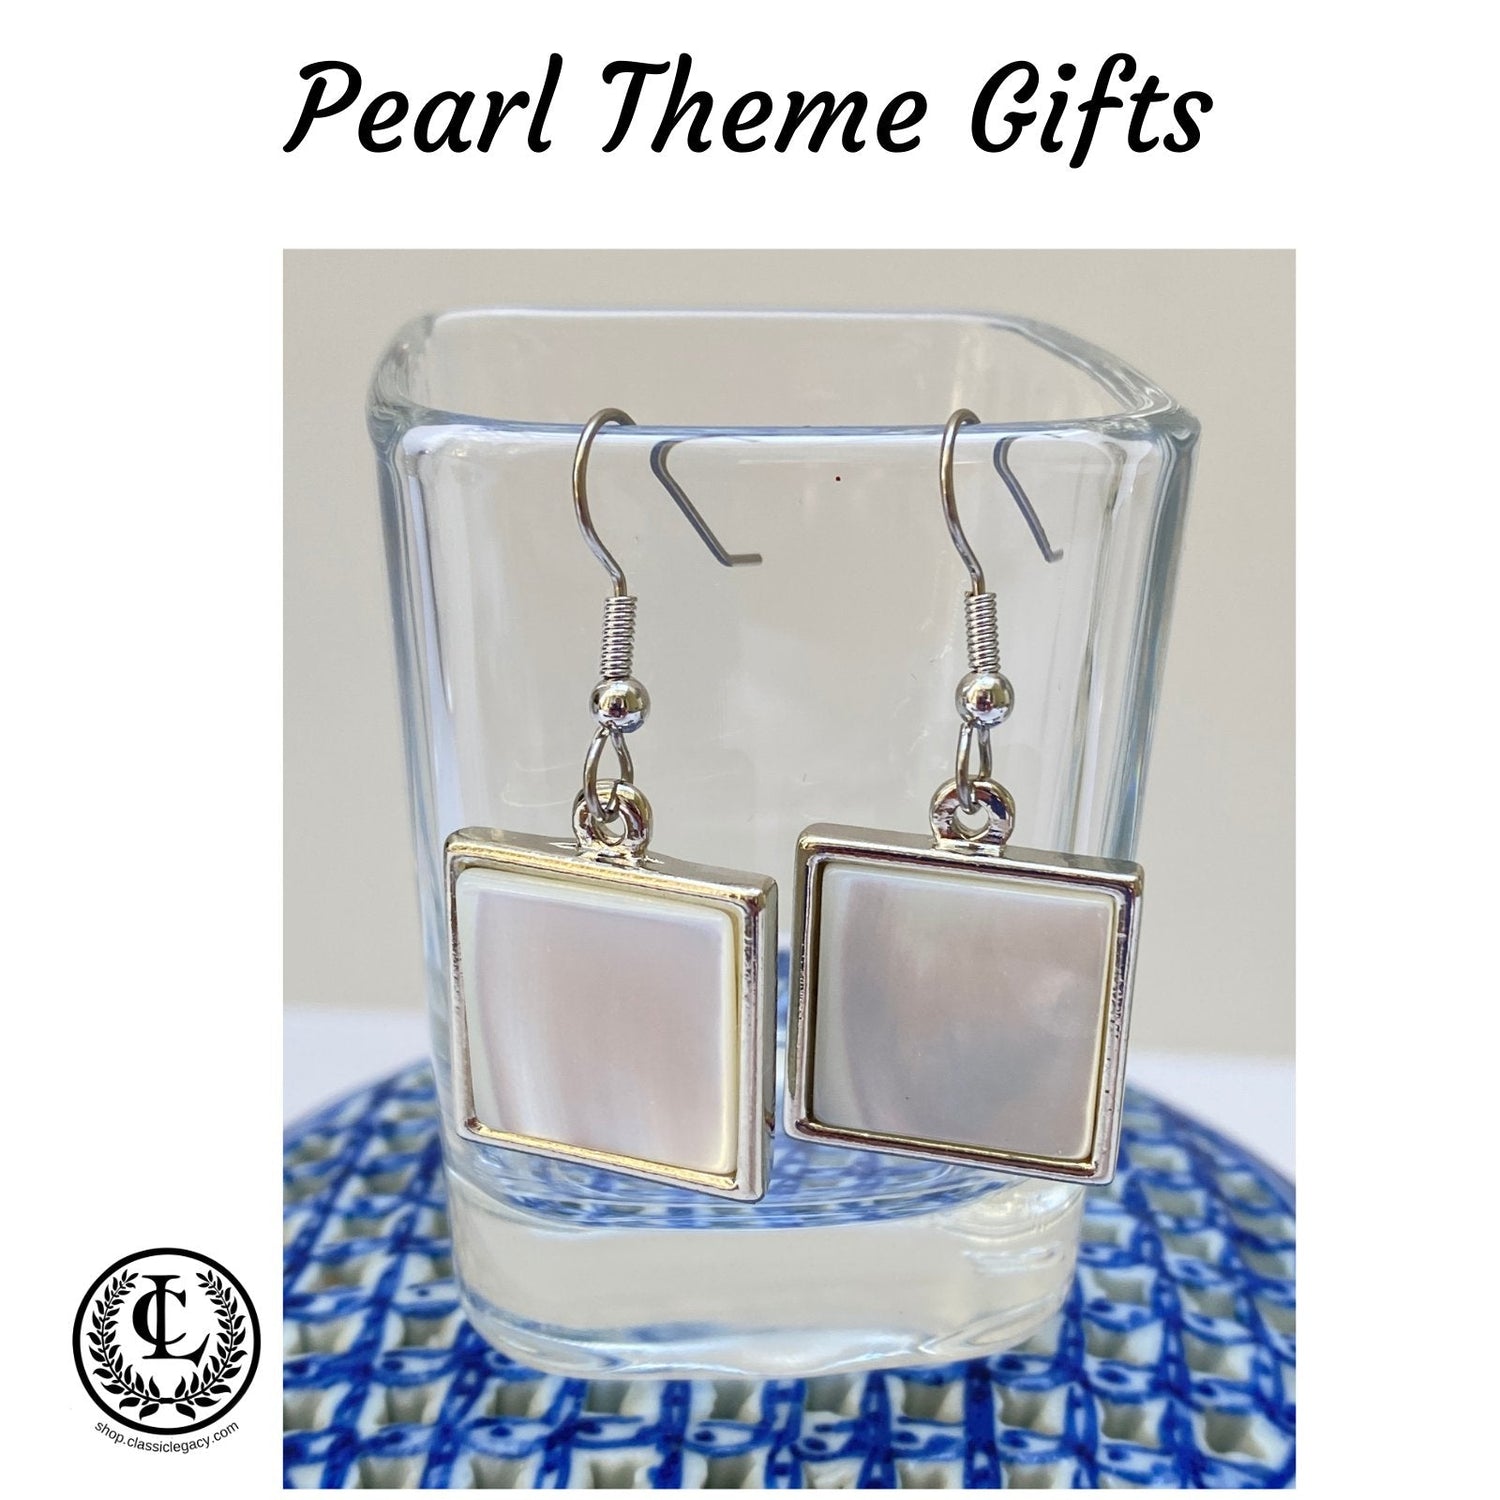 Pearl Gifts are perfect to celebrate 30th anniversaries.  